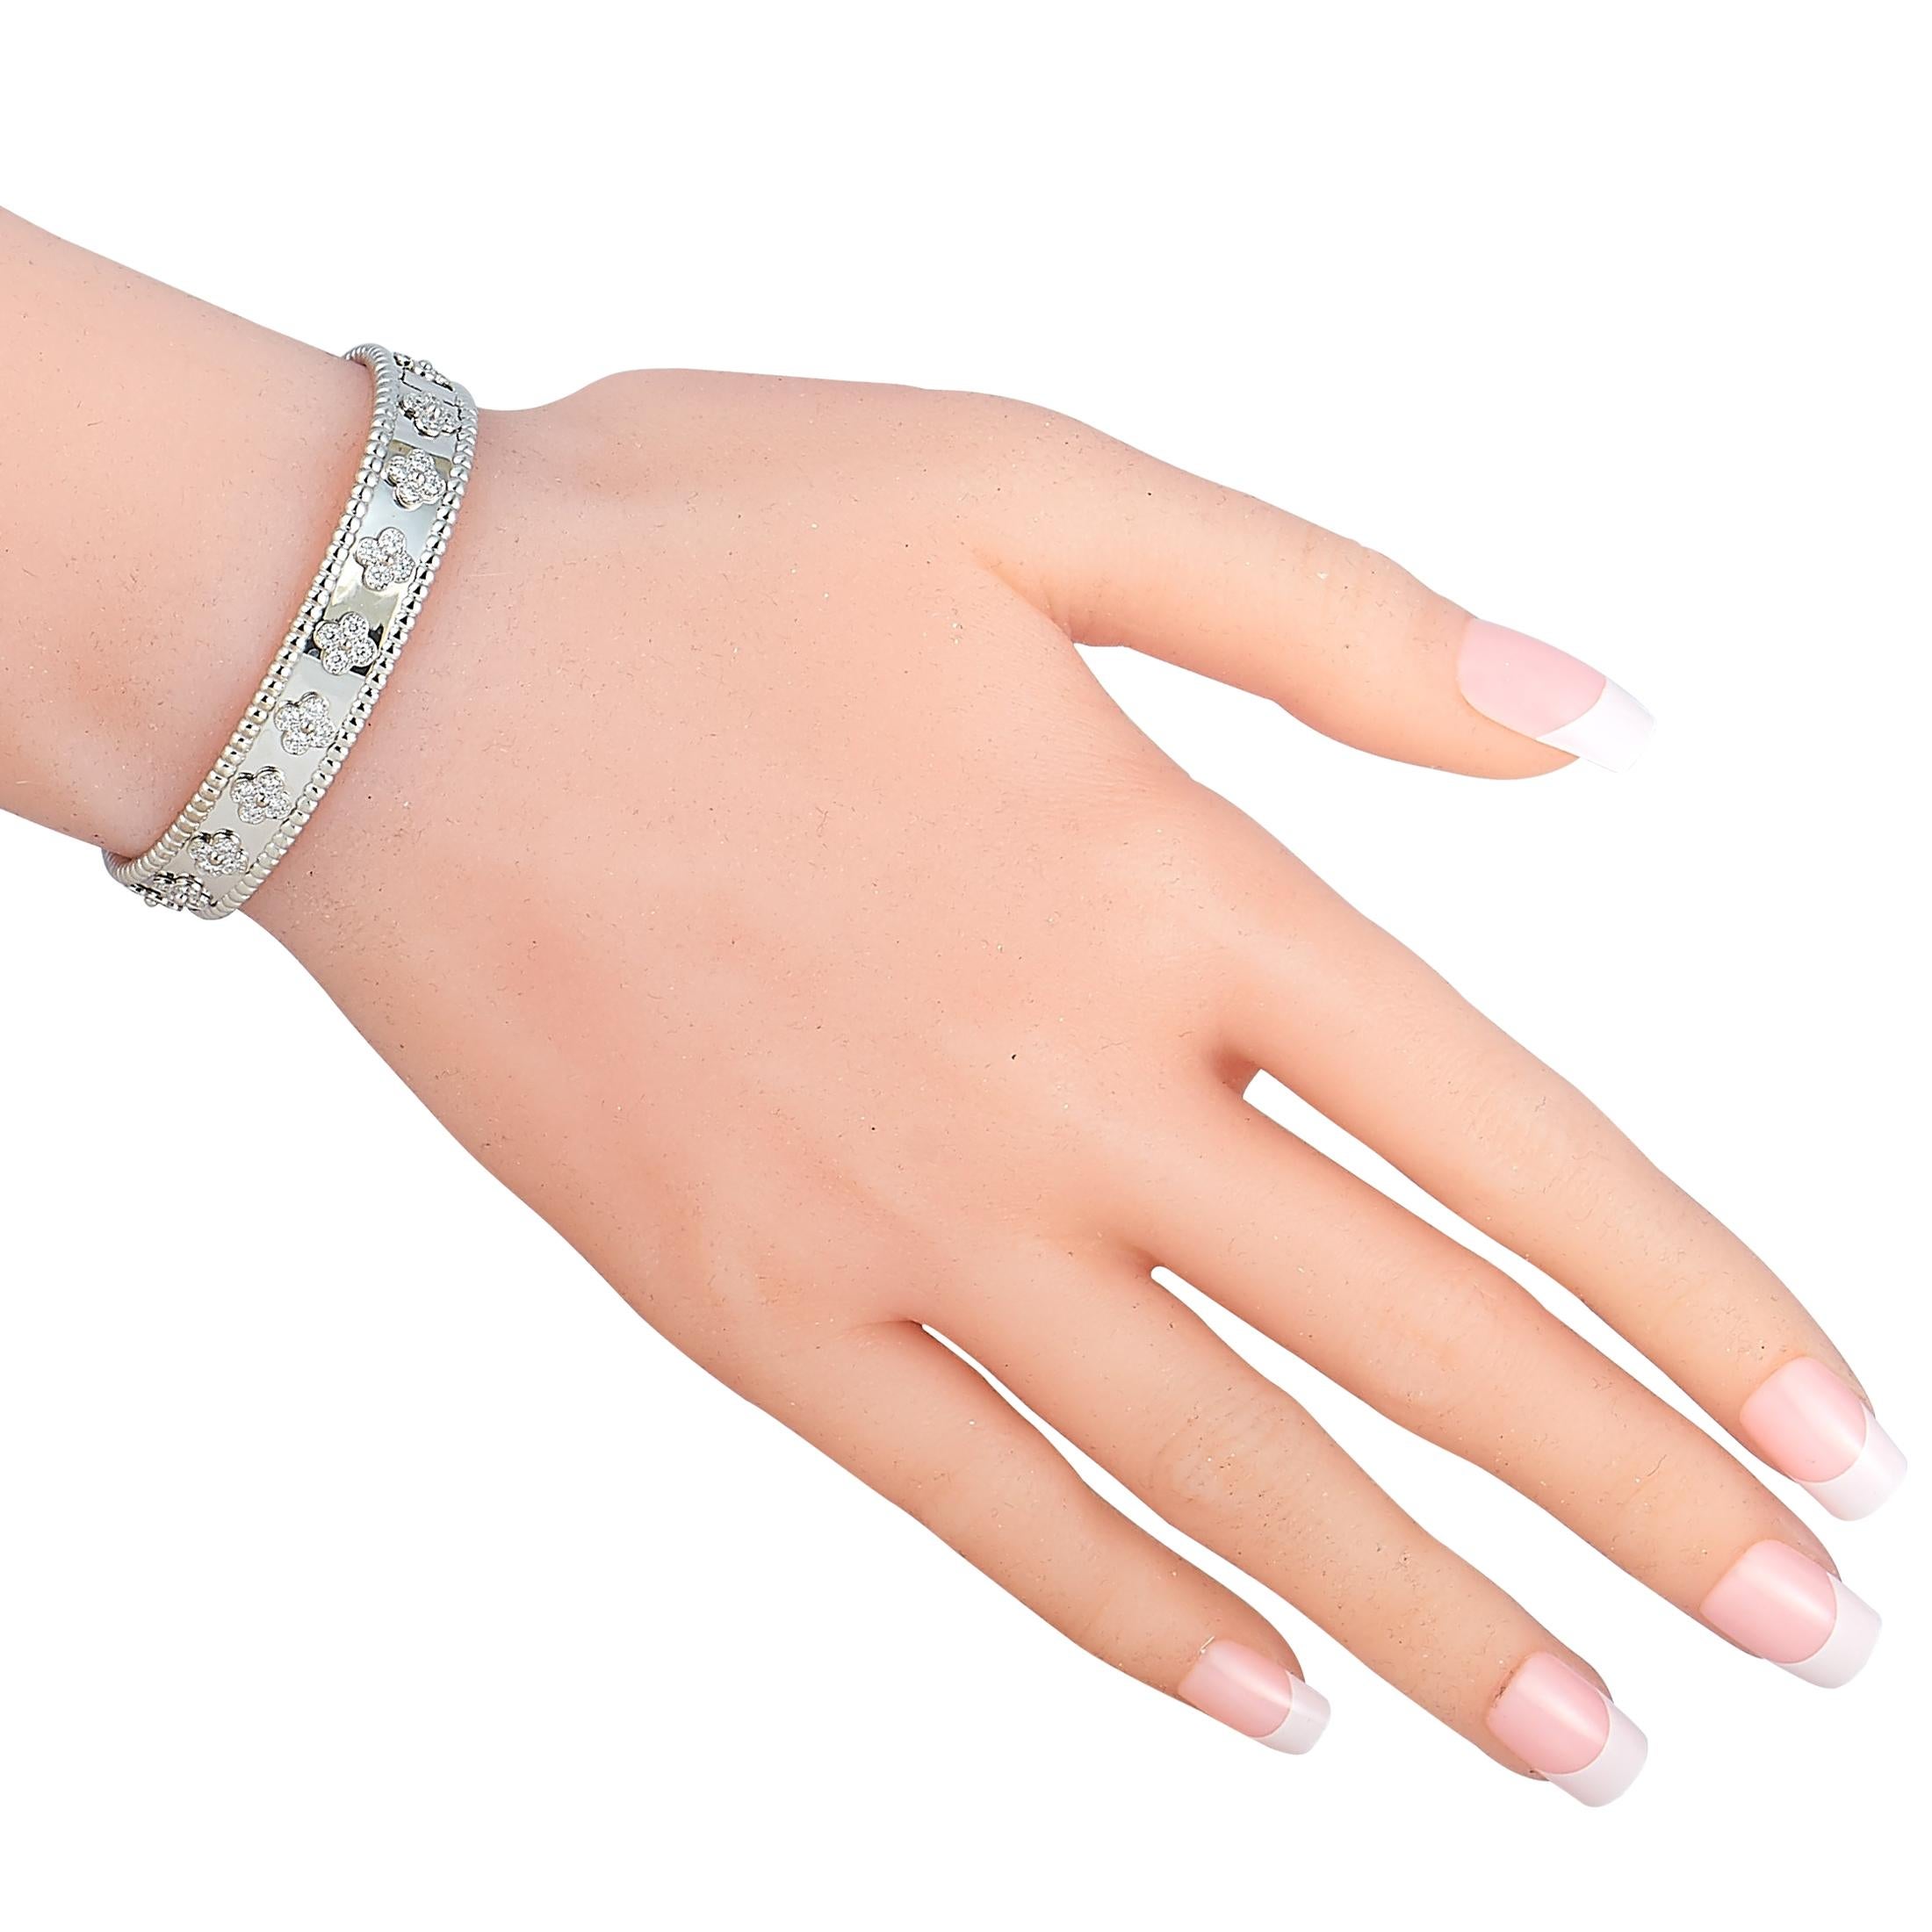 The Van Cleef & Arpels “Perlée” bracelet is made of 18K white gold and boasts clover motifs embellished with diamonds. The bracelet weighs 31.7 grams and measures 6.65” in length.

This jewelry piece is offered in estate condition and includes the